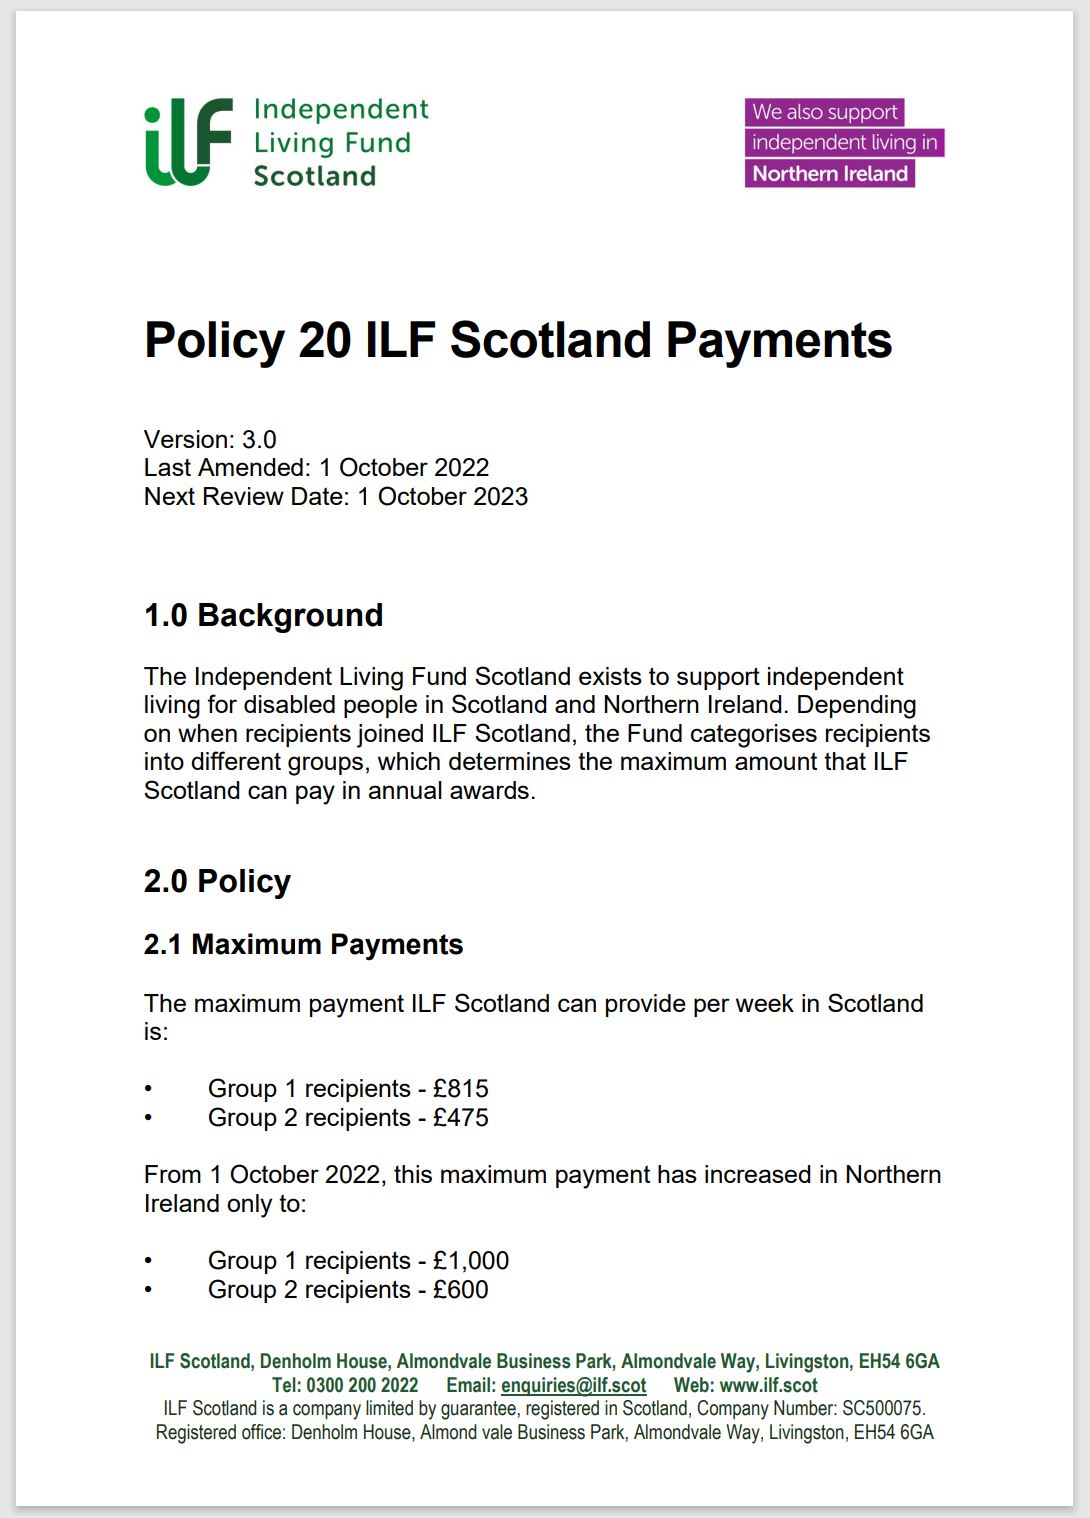 Policy 20 cover page - showing ILF logos and text.